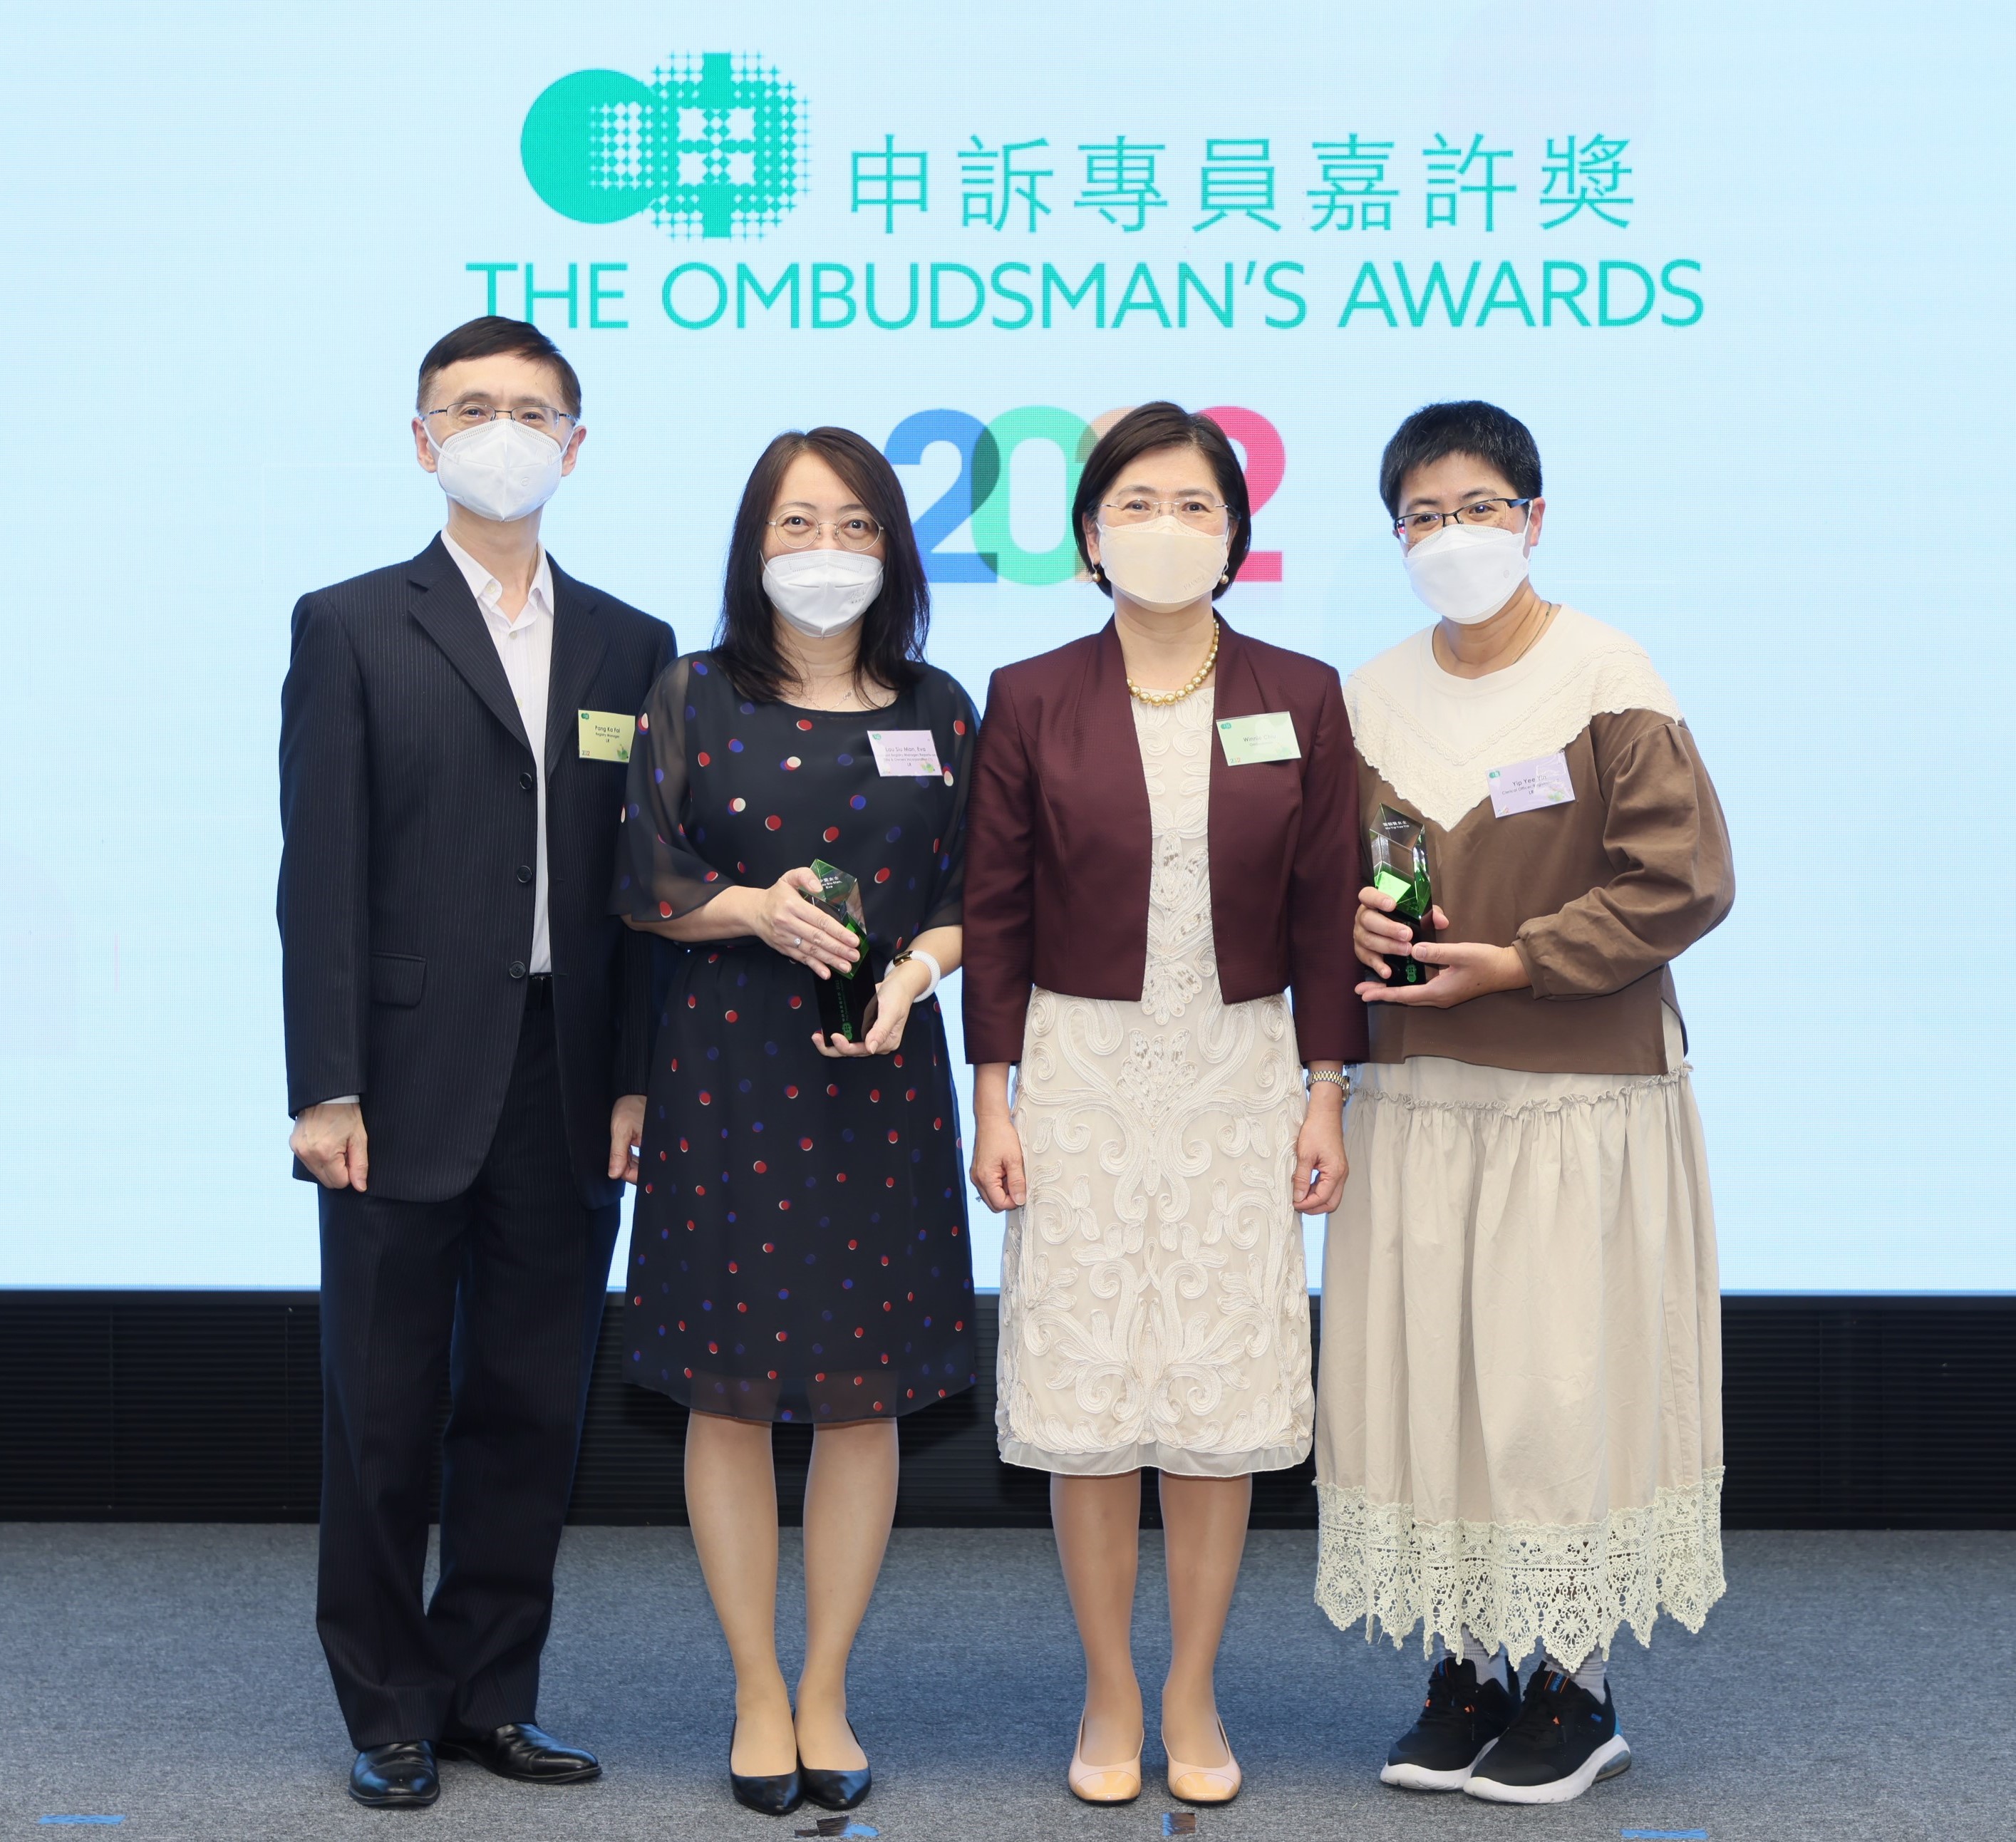 The Ombudsman, Ms Winnie CHIU (second right) and the Registry Manager, Mr KF PANG (first left) taking photo with the awardees of The Ombudsman's Awards for Officers of Public Organisations, Ms LAU Siu-man, Eva, Senior Land Registration Officer, and Ms YIP Yee-yin, Clerical Officer, of the Land Registry